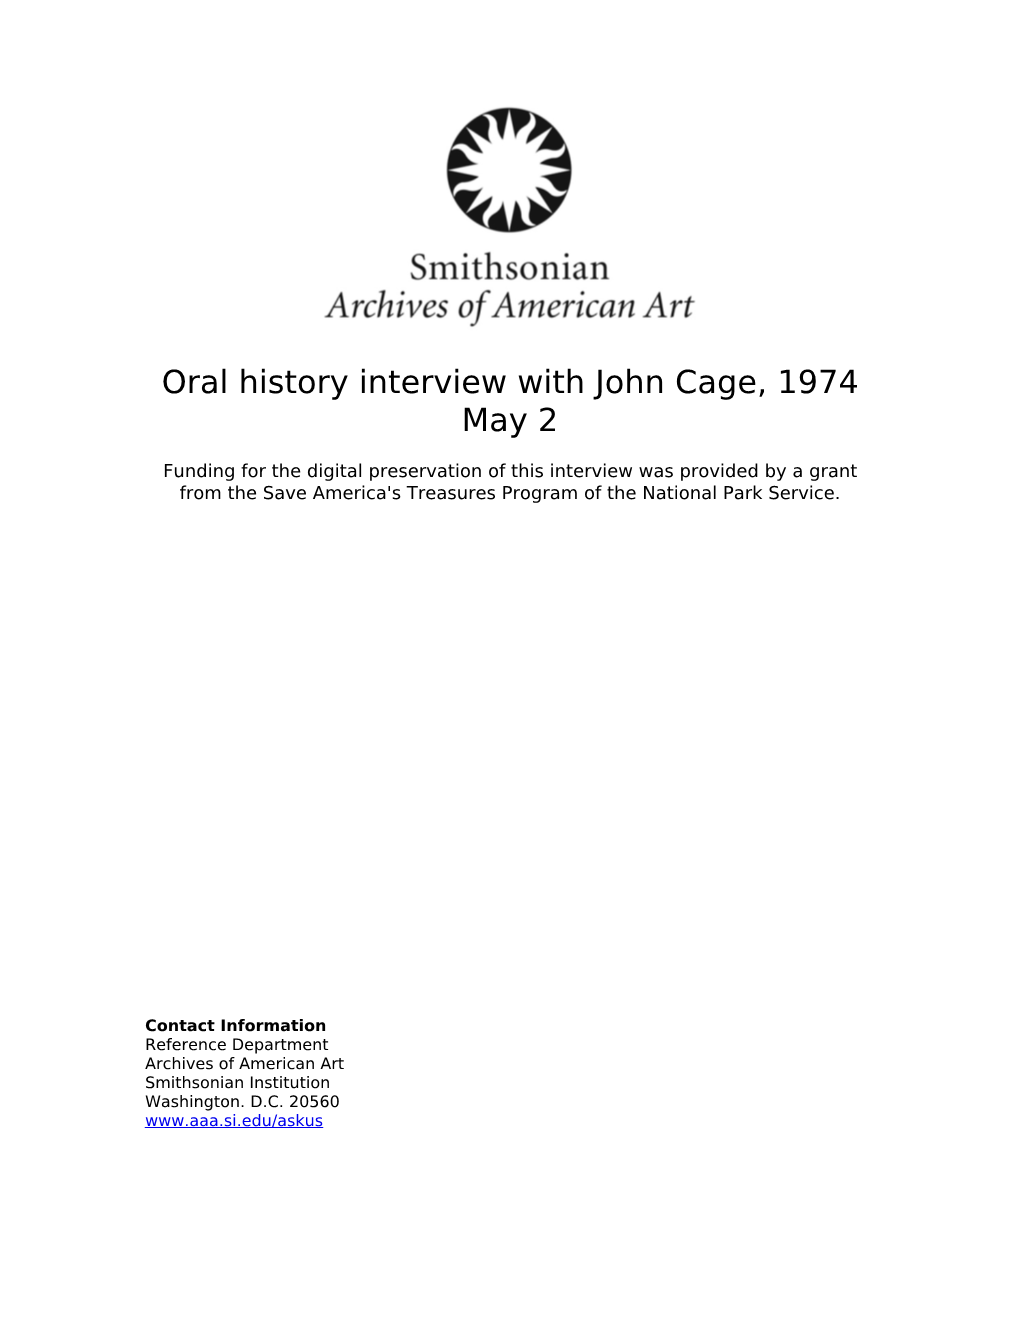 Oral History Interview with John Cage, 1974 May 2